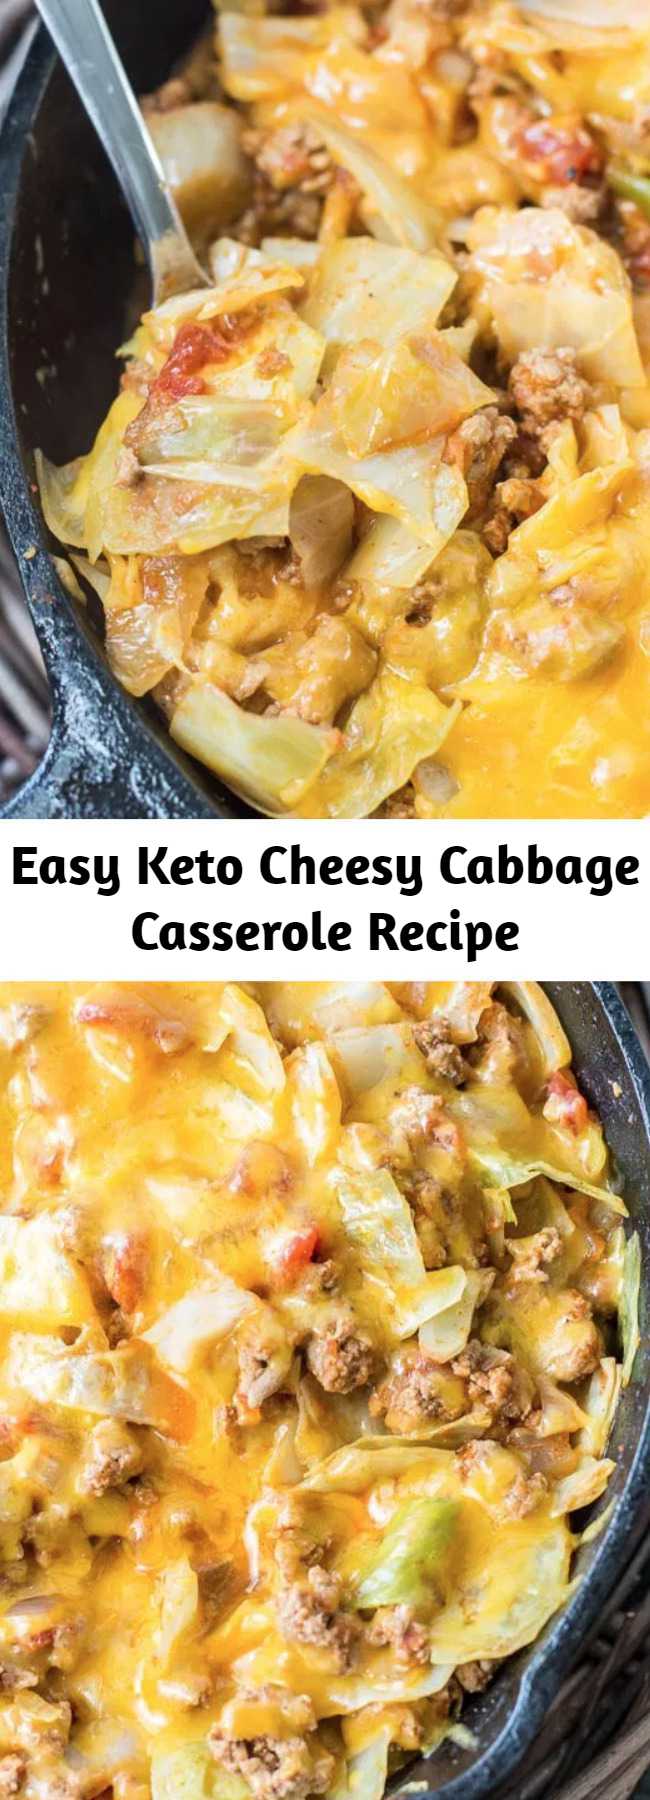 Easy Keto Cheesy Cabbage Casserole Recipe - This Keto One Pan Cabbage Casserole is a low carb, easy dinner ready in 30 minutes! The perfect easy keto dinner! Under 9 net carbs per serving! #keto #lowcarb #onepan